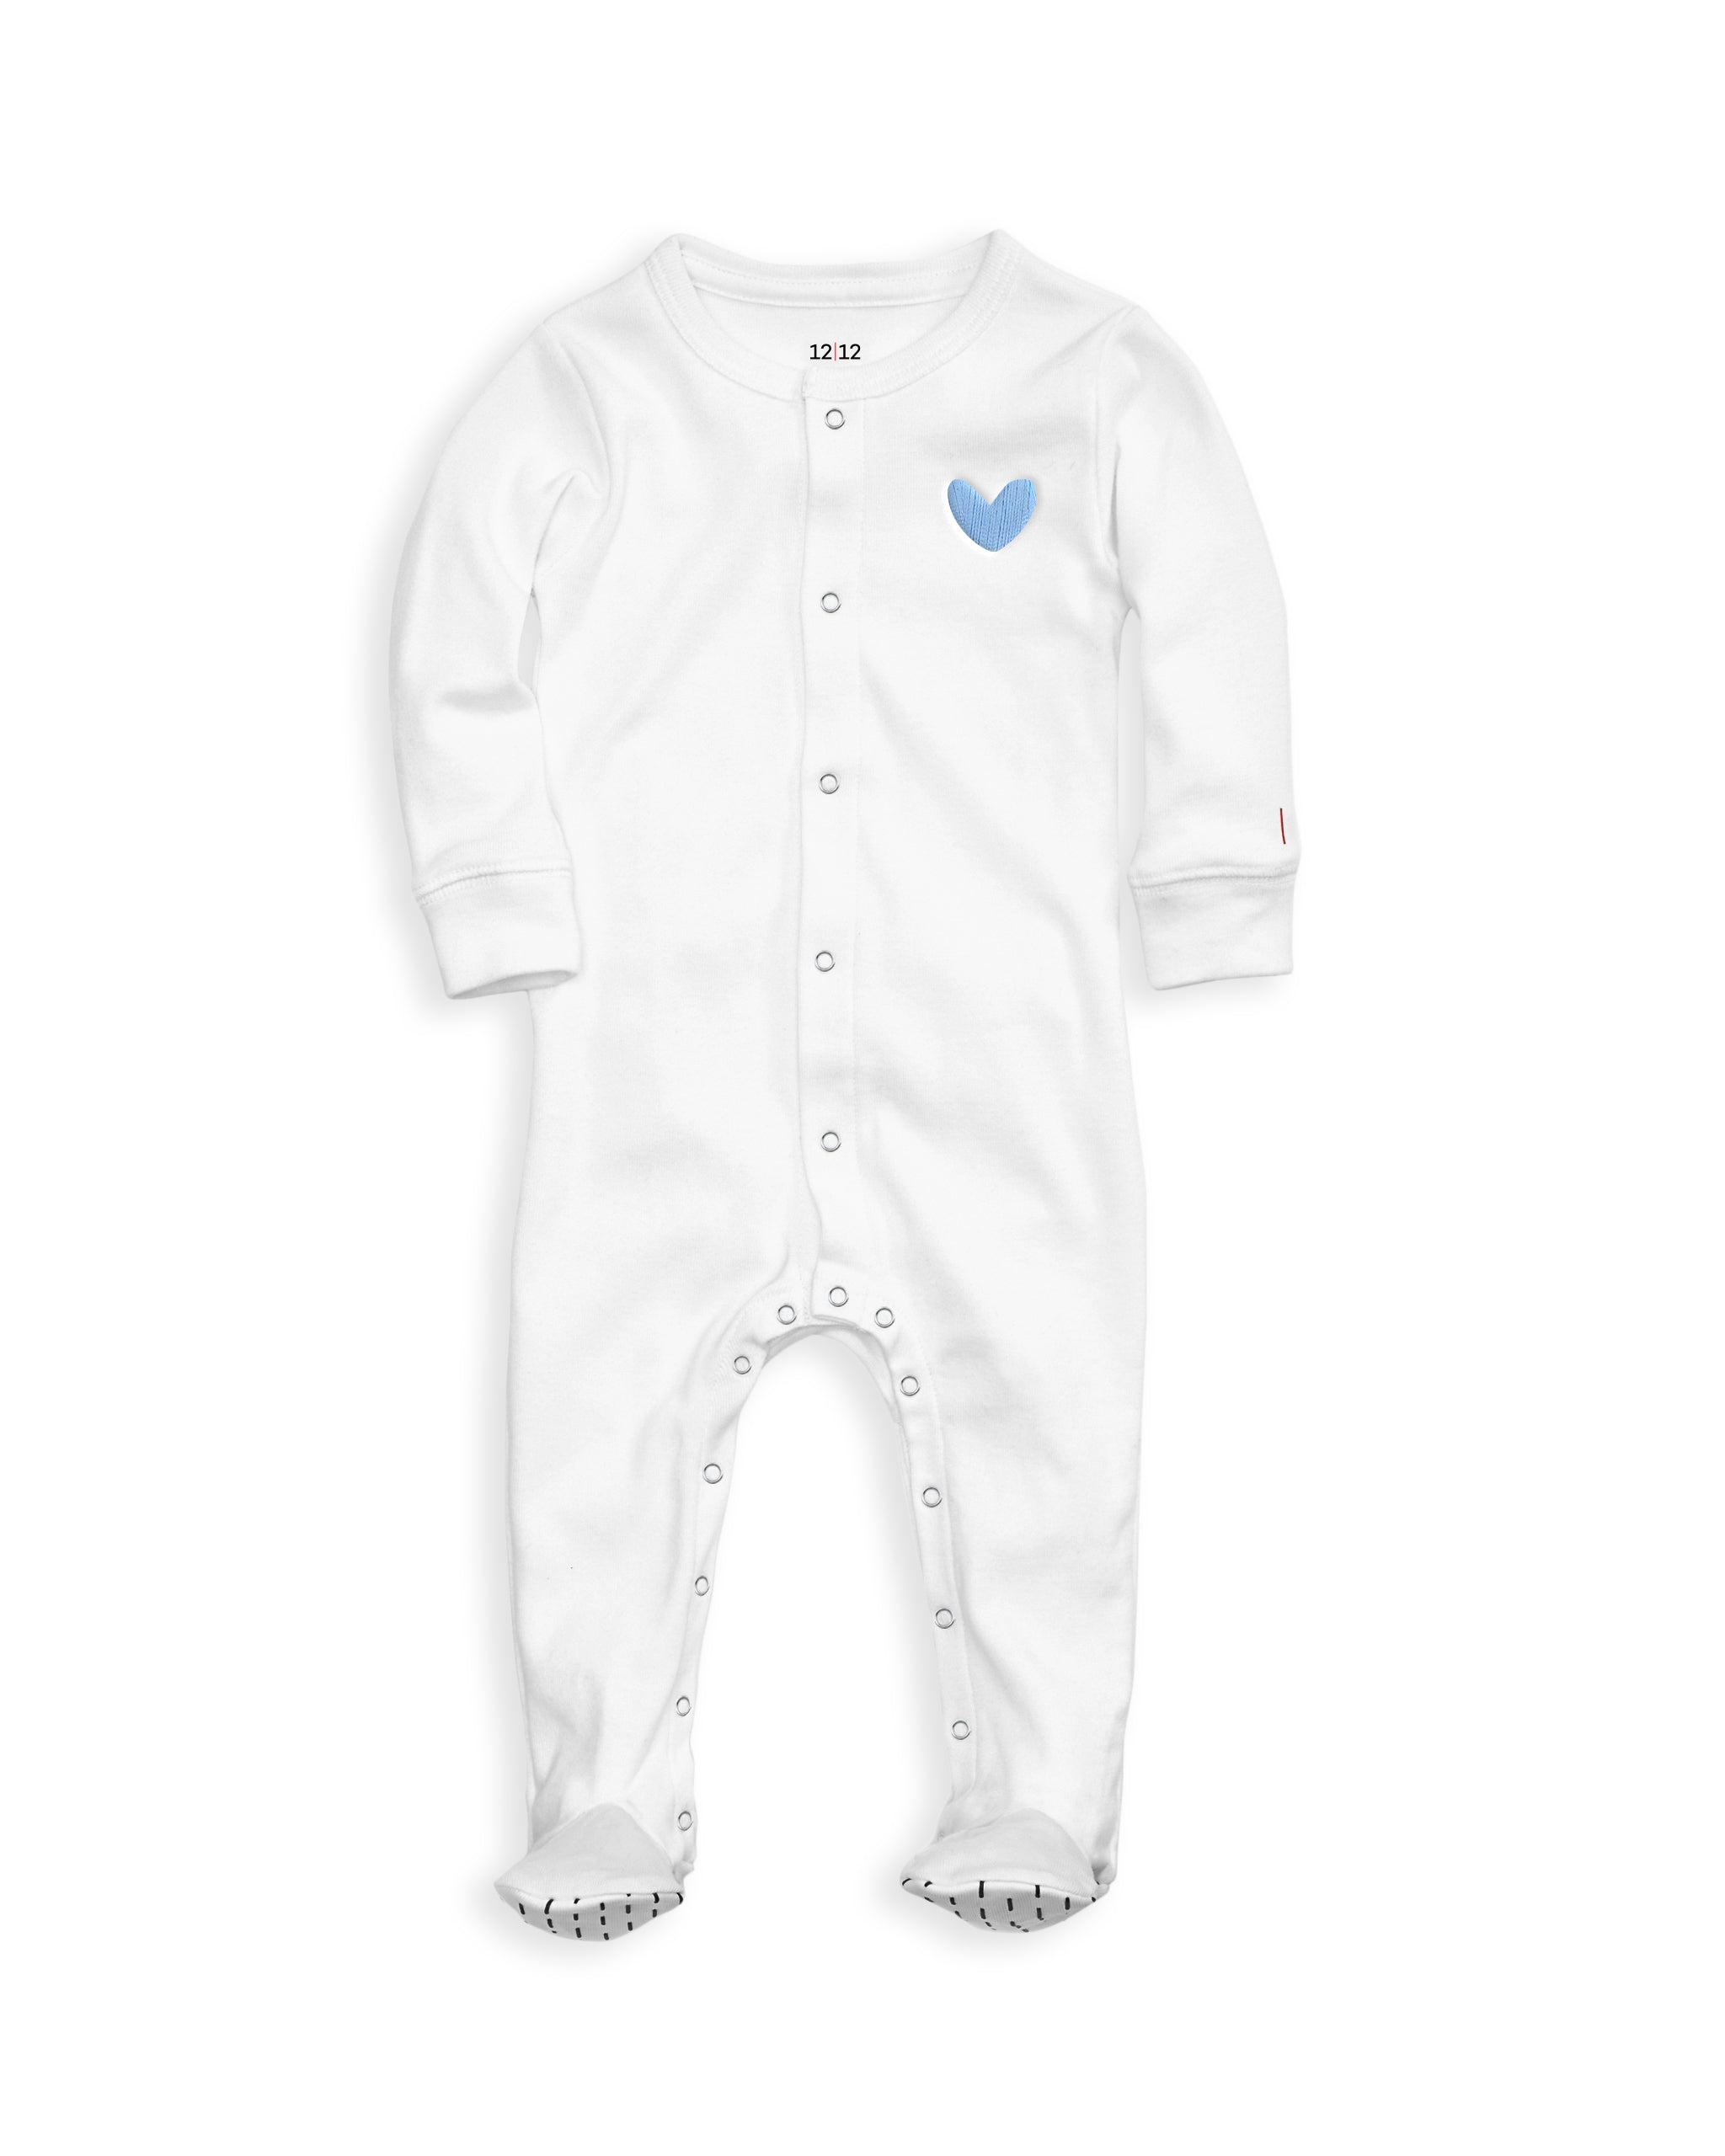 The Organic Embroidered Snap Footie [White with Blue Heart]